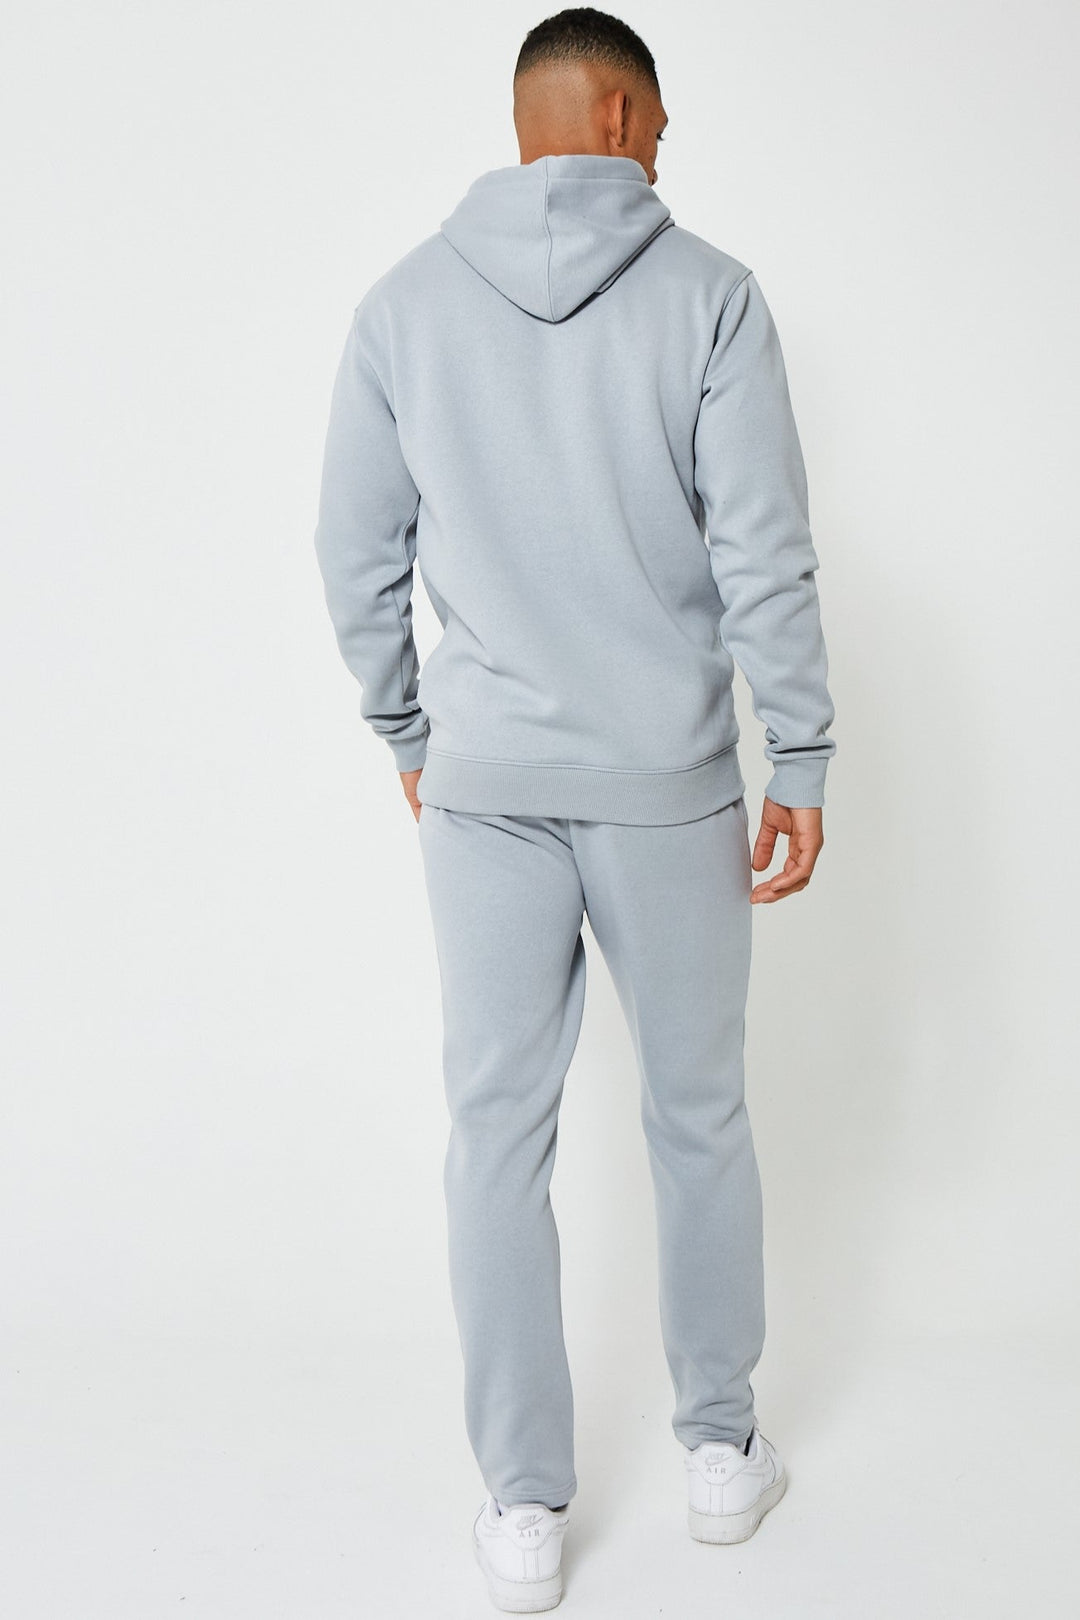 Holloway Road Over the Head Hoody Tracksuit - Alloy Grey